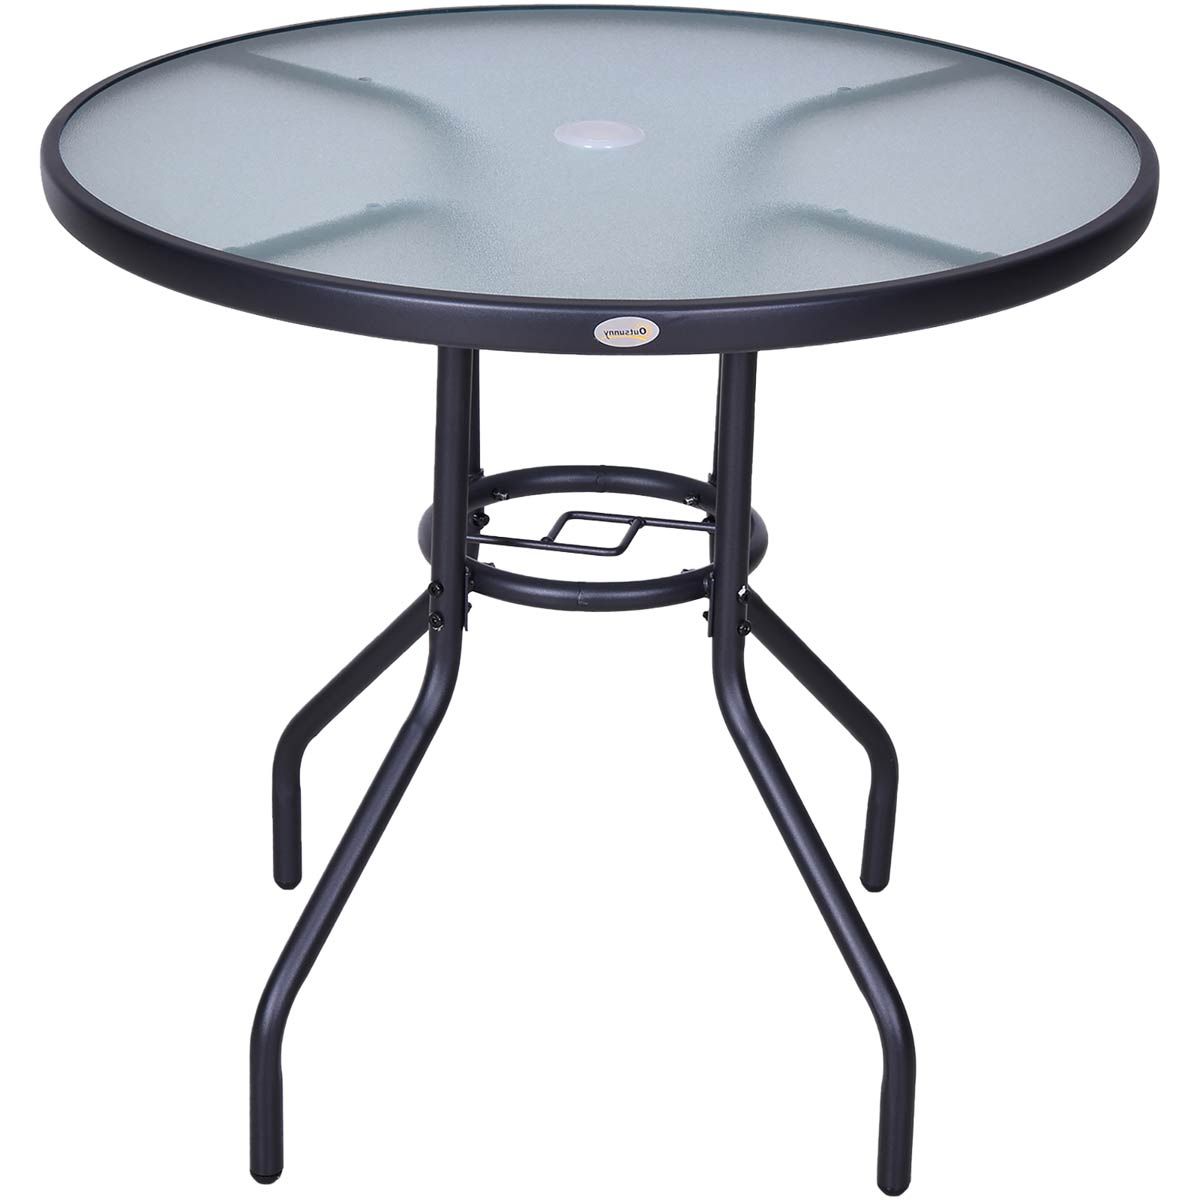 Outsunny Outdoor Round Dining Table Tempered Glass Top With Parasol Hole  80cm Black (View 13 of 15)